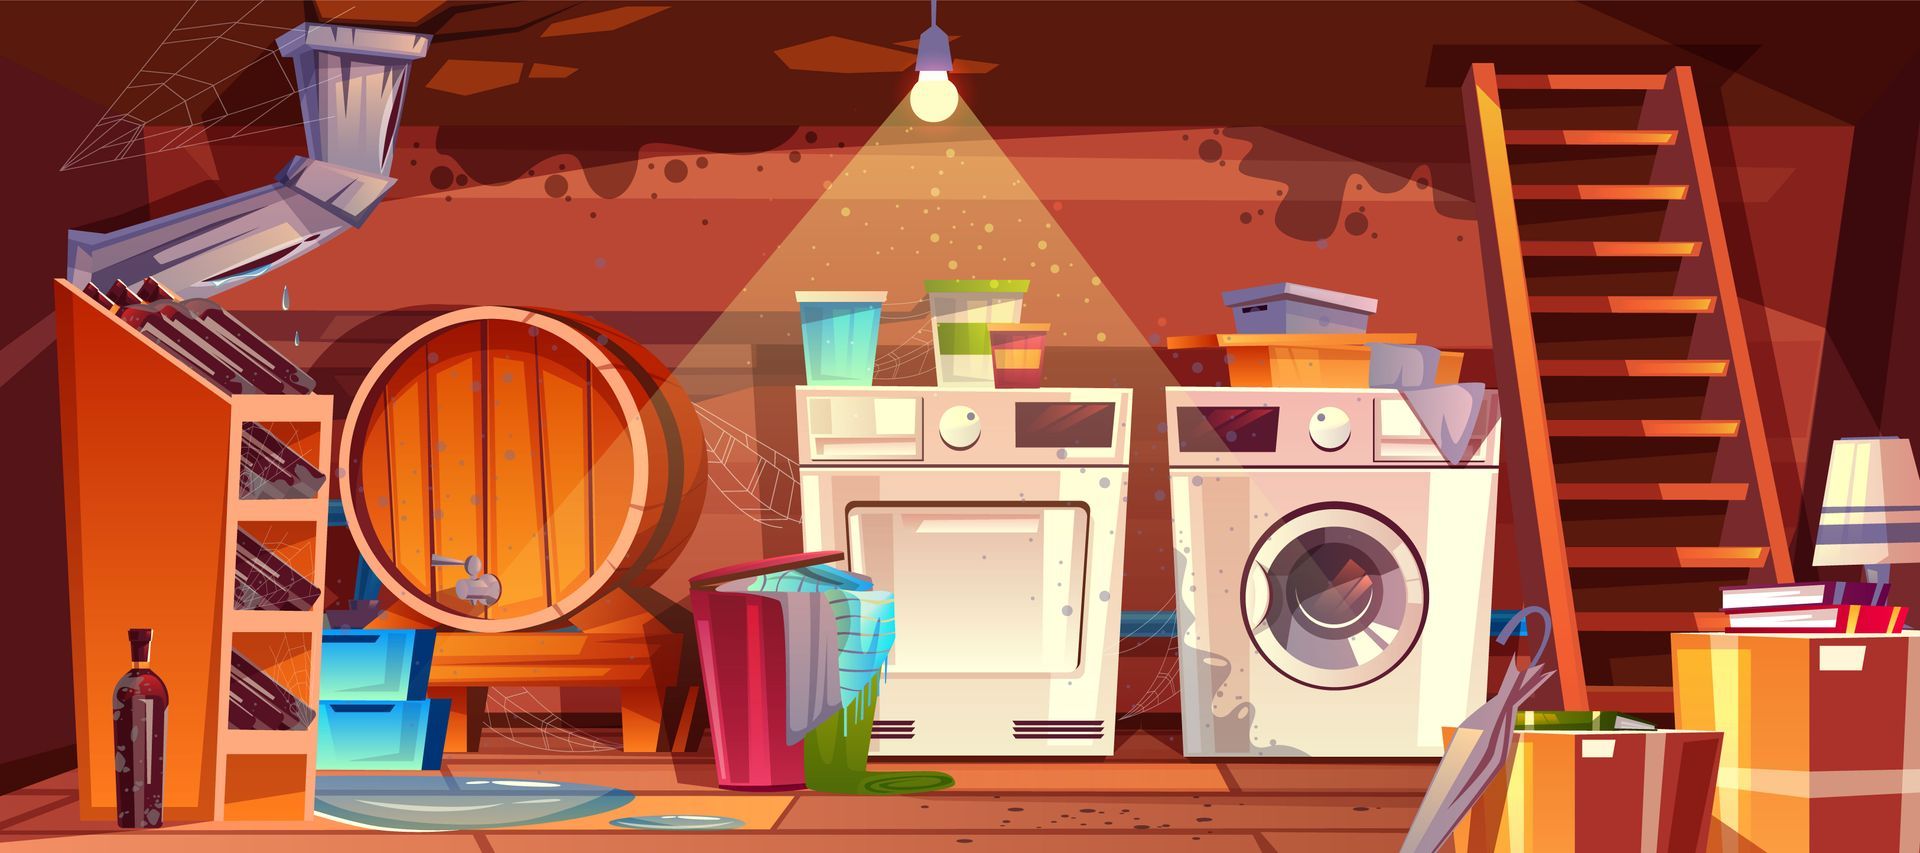 a cartoon illustration of a dirty basement with a washing machine , dryer , and barrels .